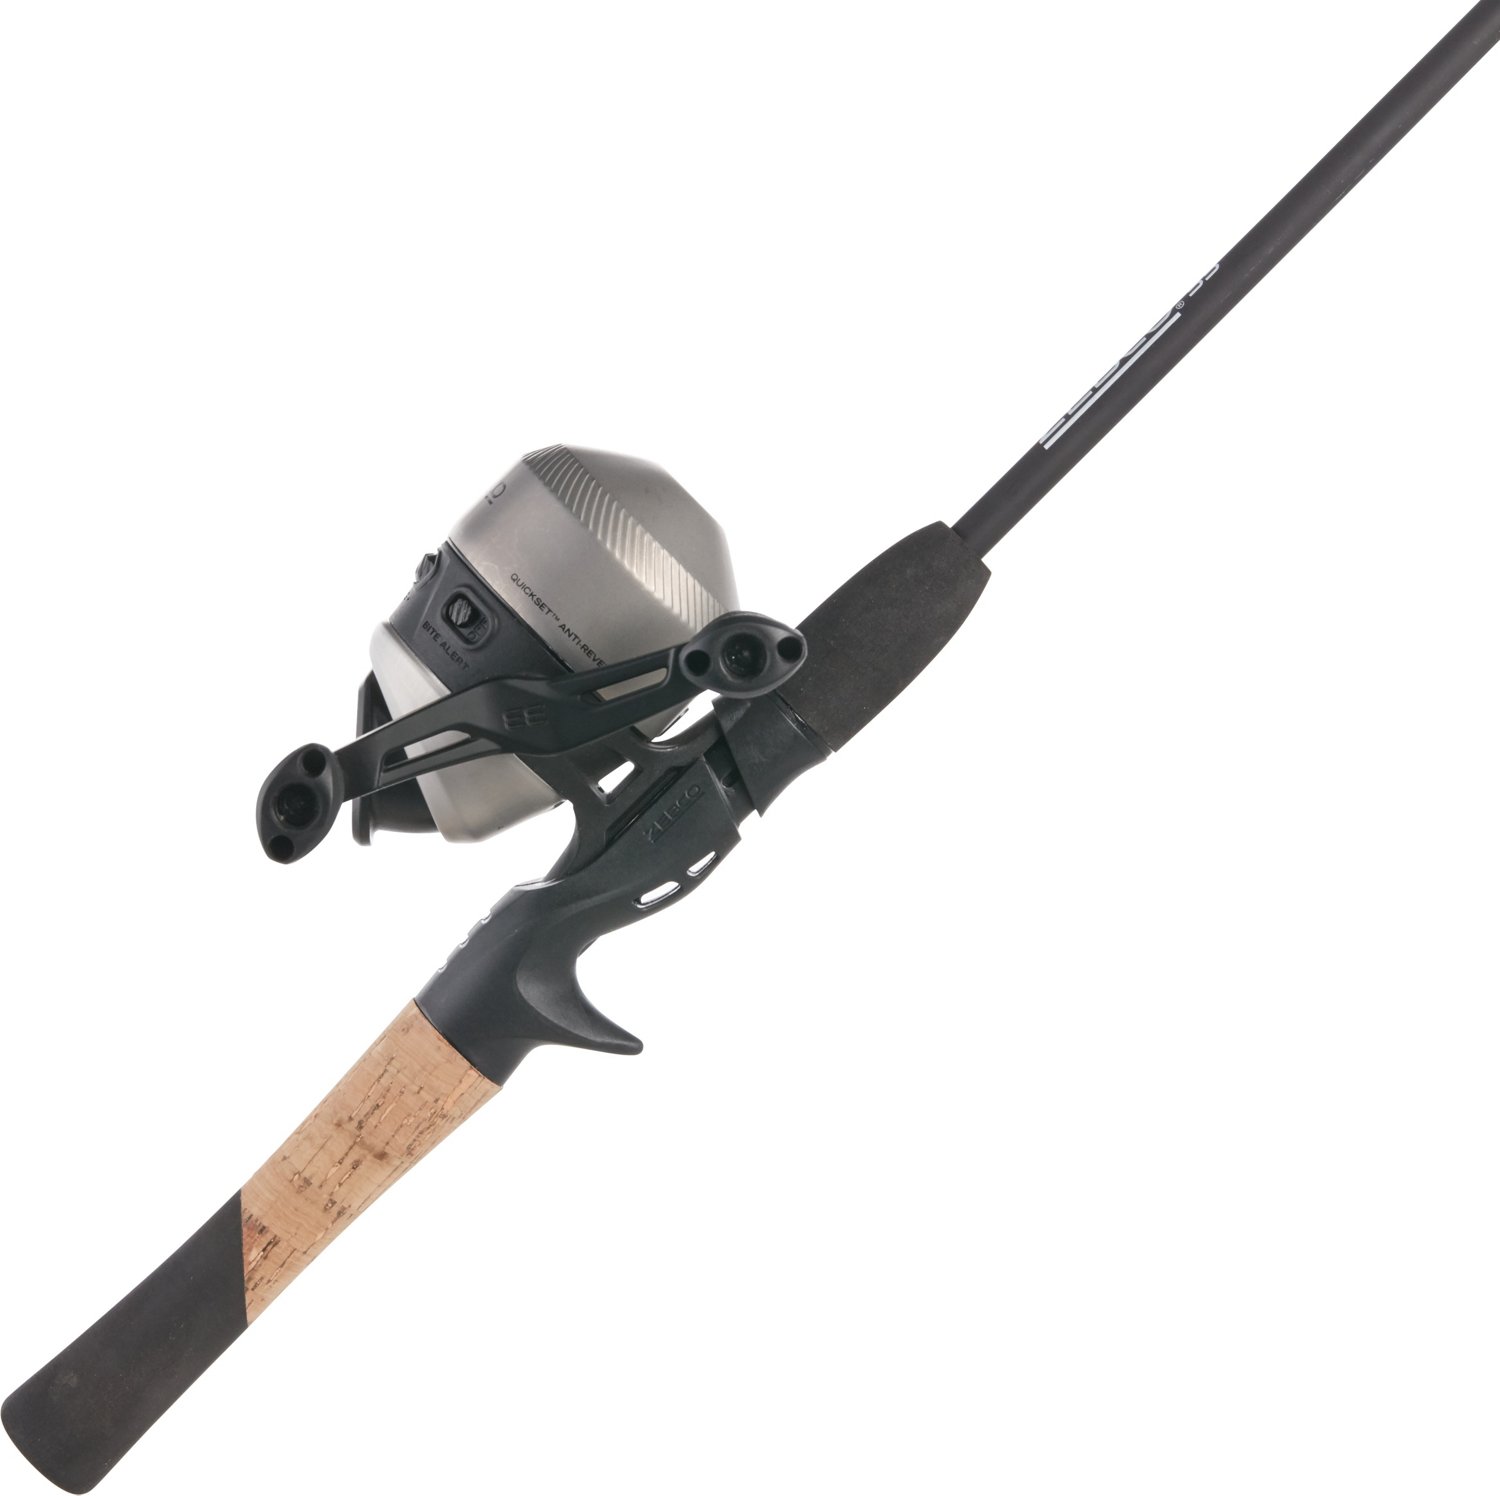 Zebco 33 Spincast Reel and Fishing Rod Combo, 6-Foot 2-Piece